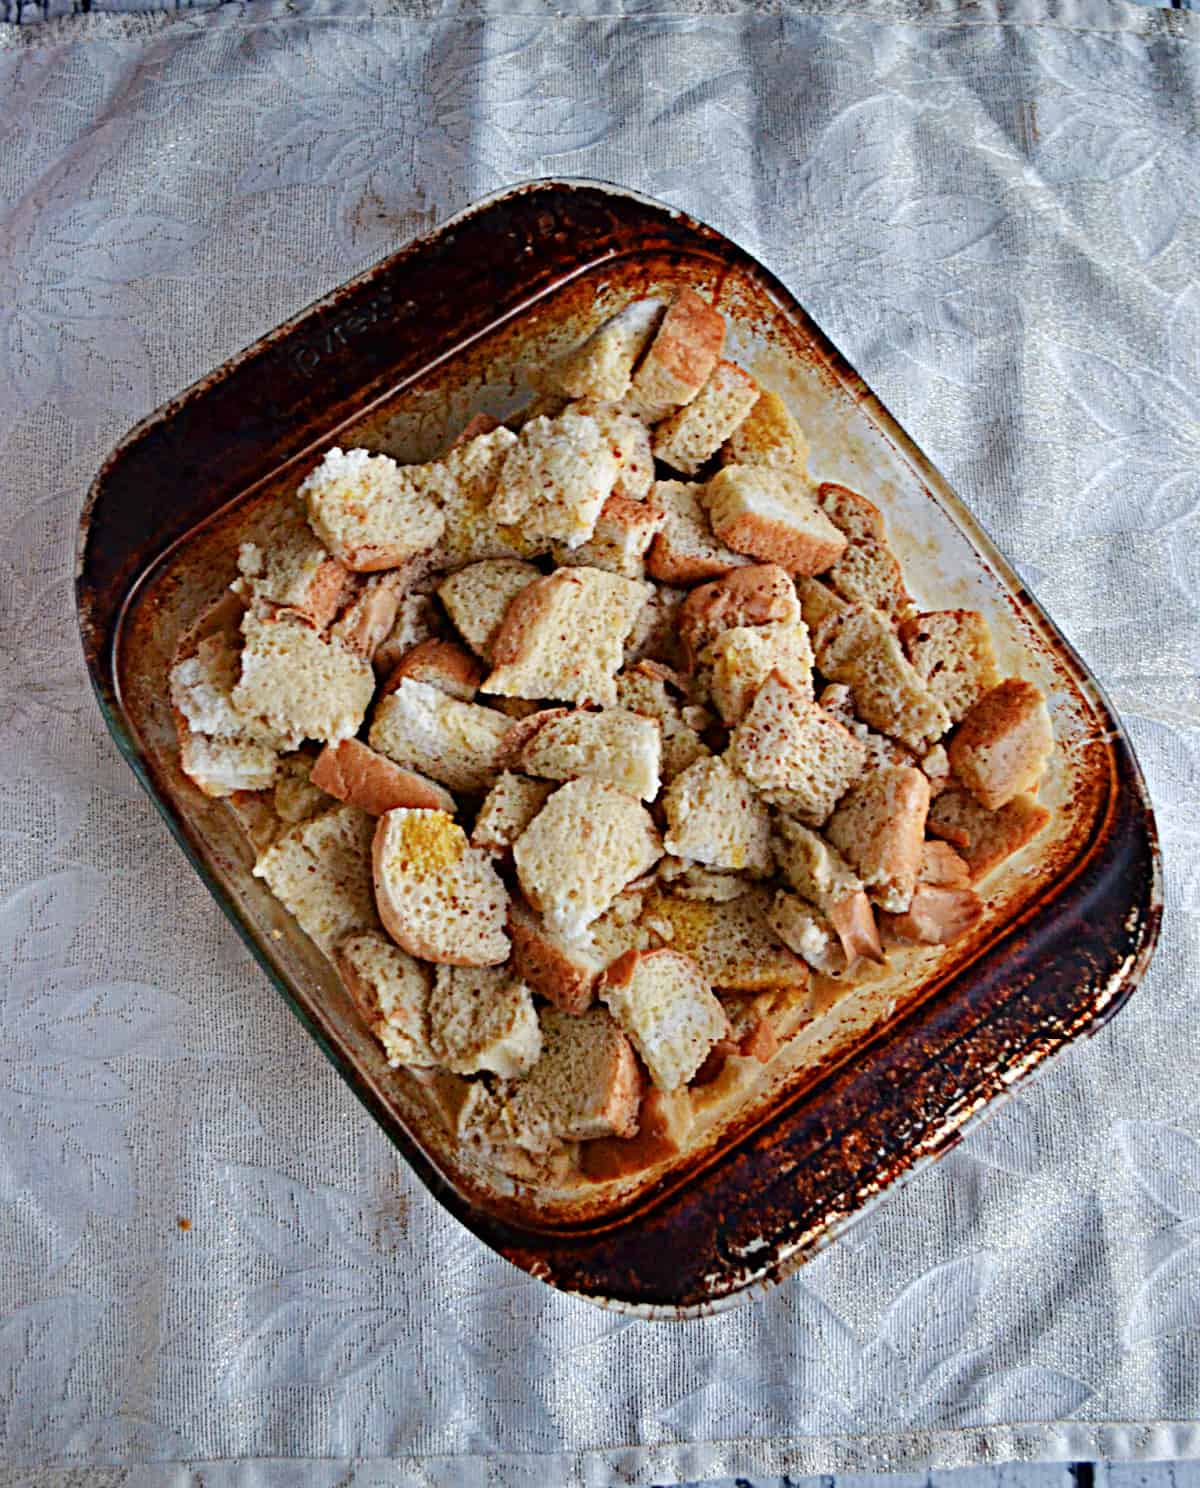 A baking dish with cut up pieces of bread.